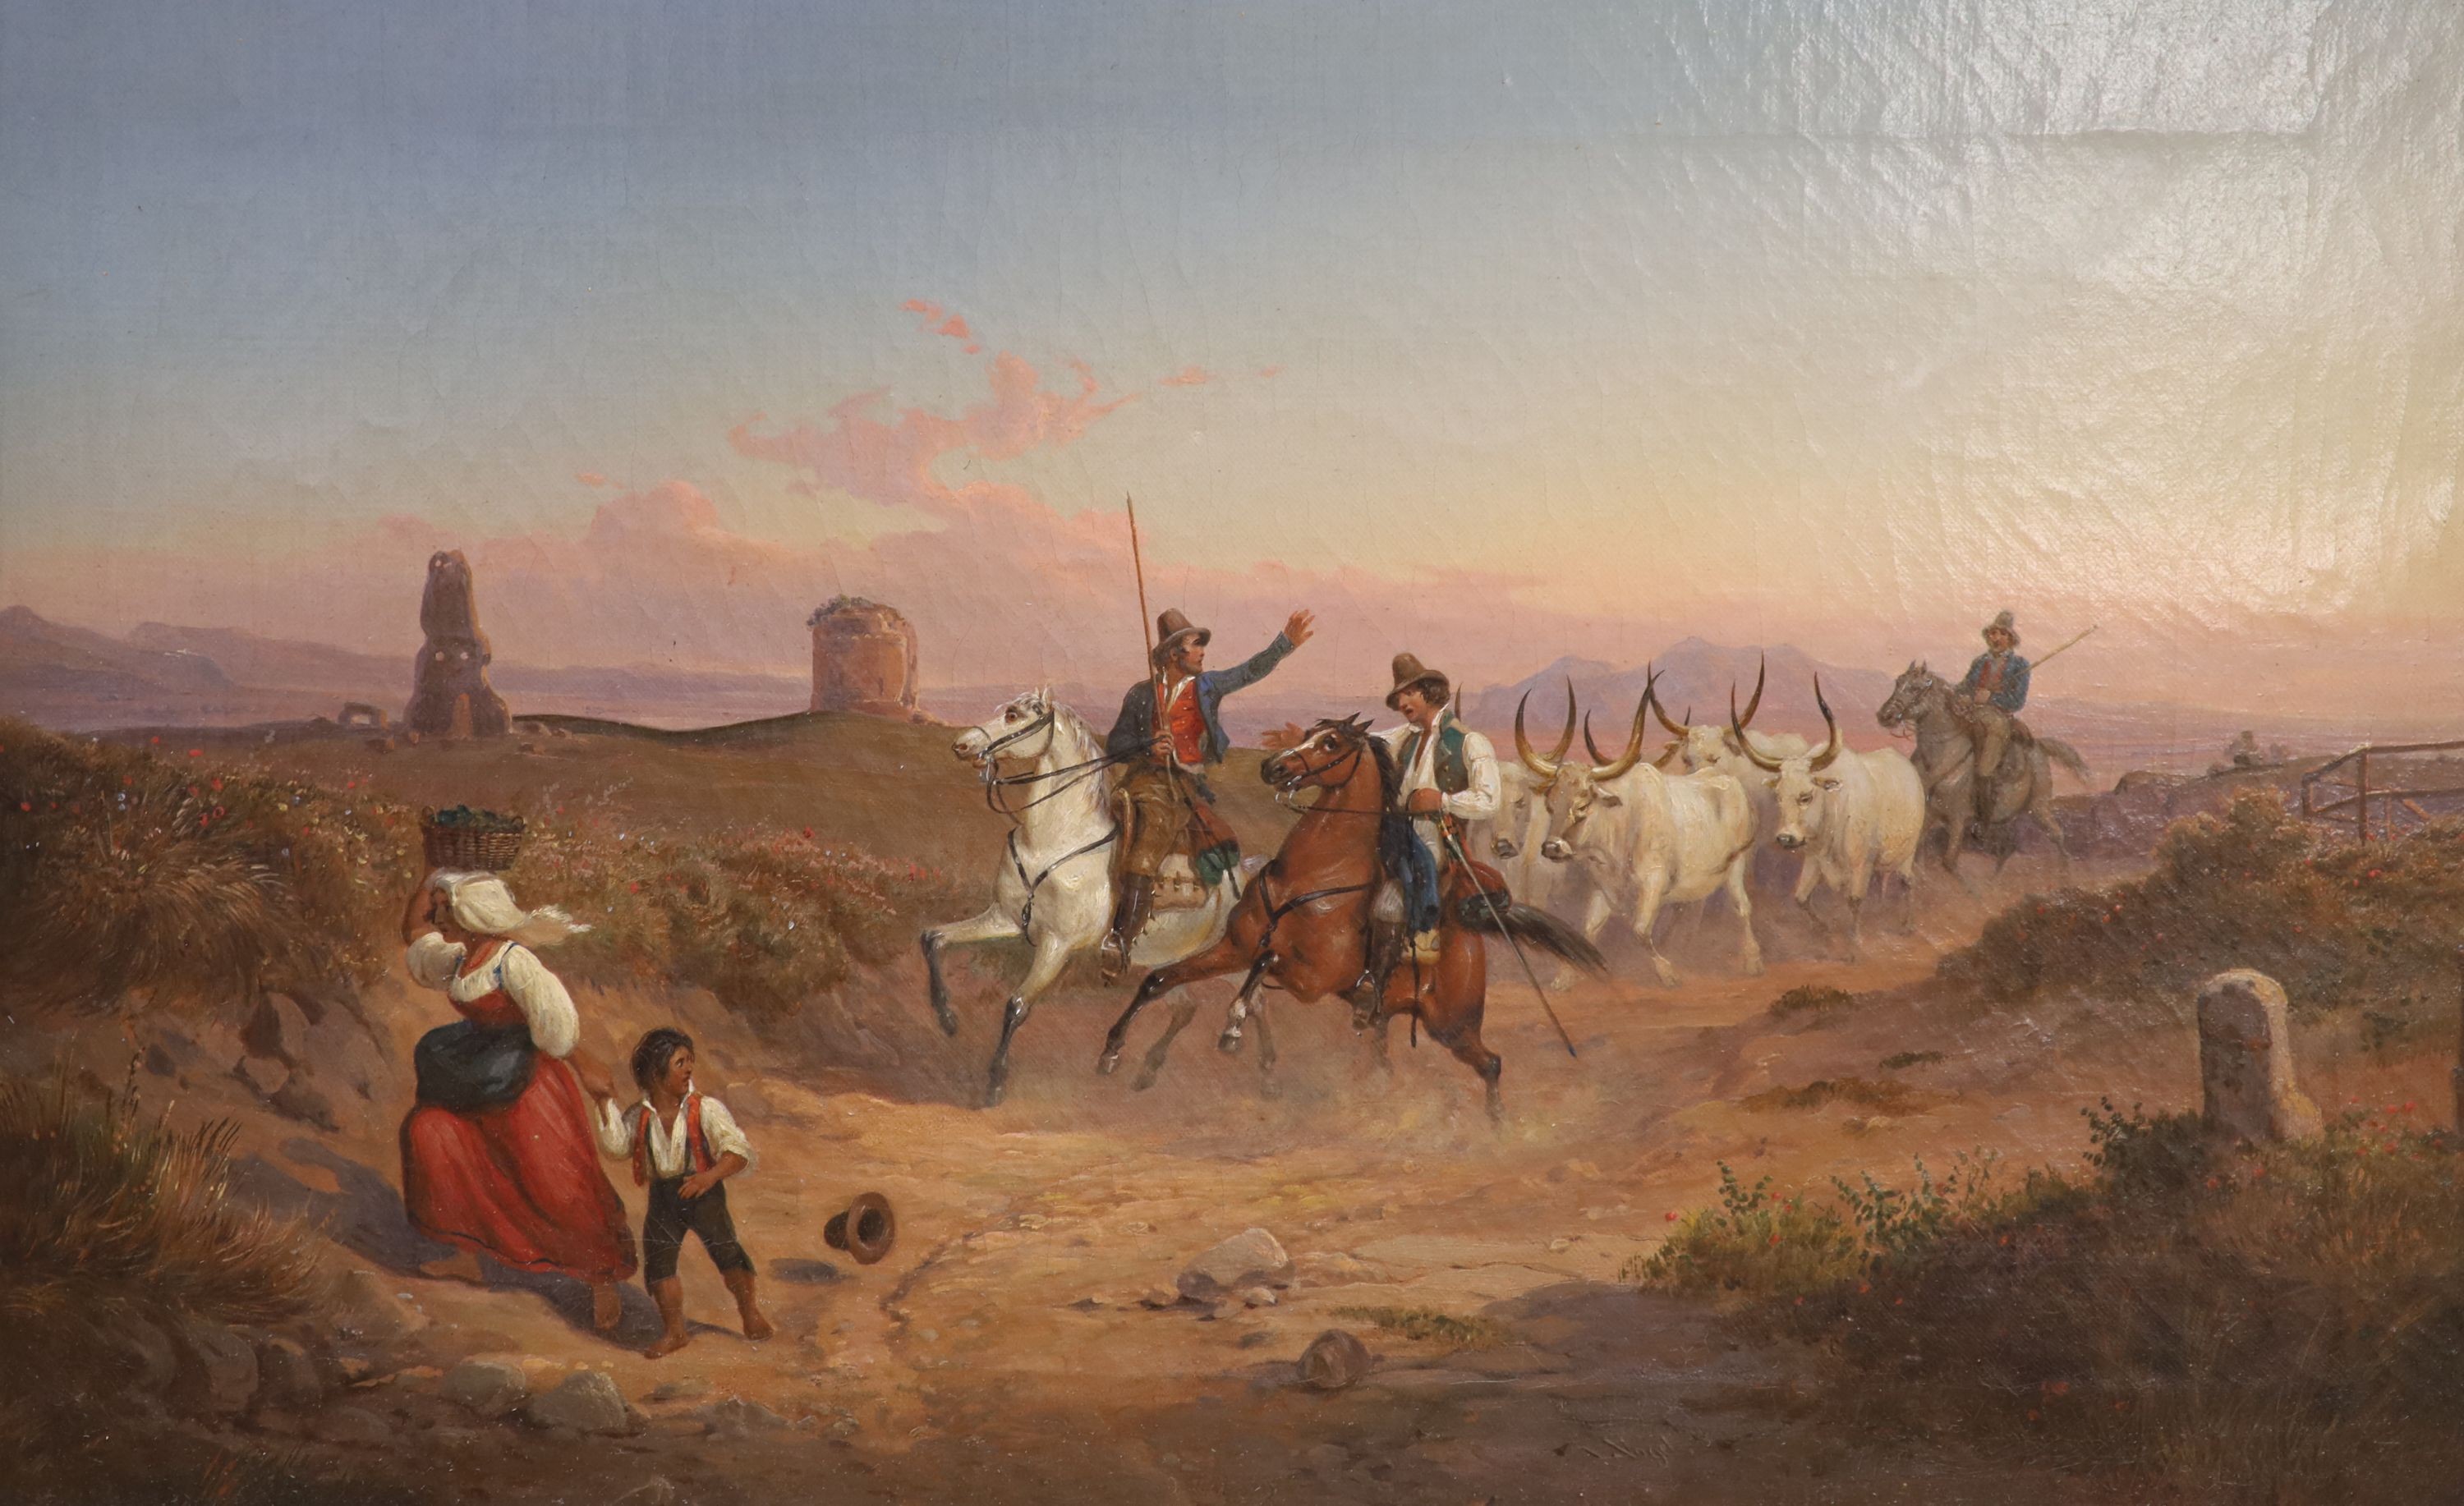 Ludwig Vogel (1788-1879) Swiss. Cattle herders, oil on canvas, signed and inscribed 'Roma, 1850' verso, 12